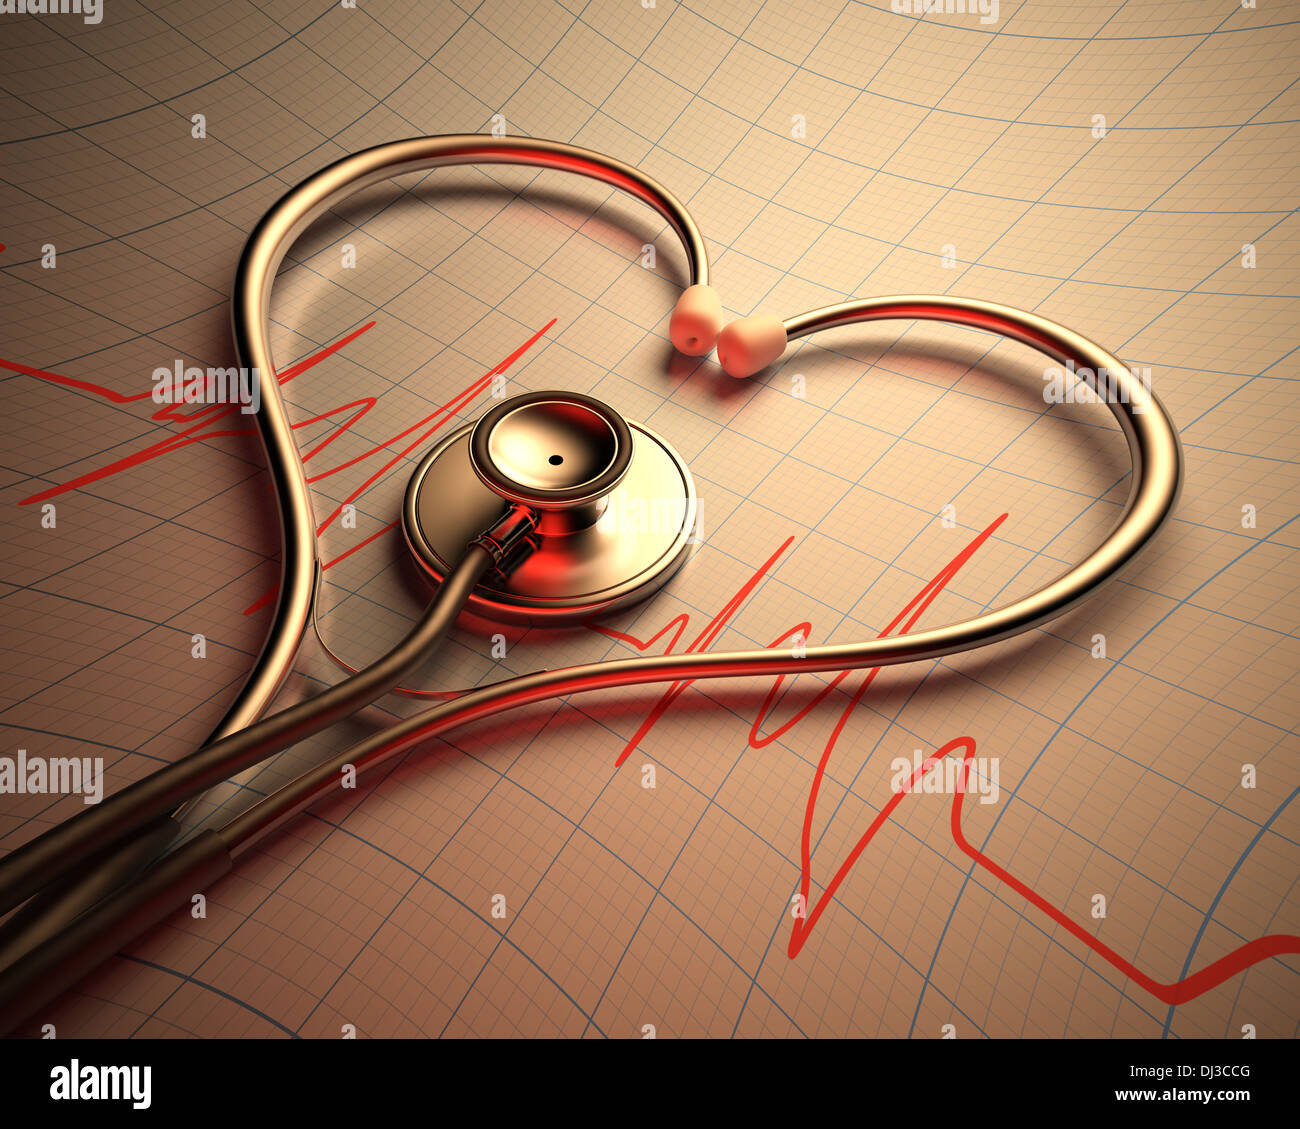 Stethoscope in shape of heart on a graph of the patient's heartbeat. Stock Photo